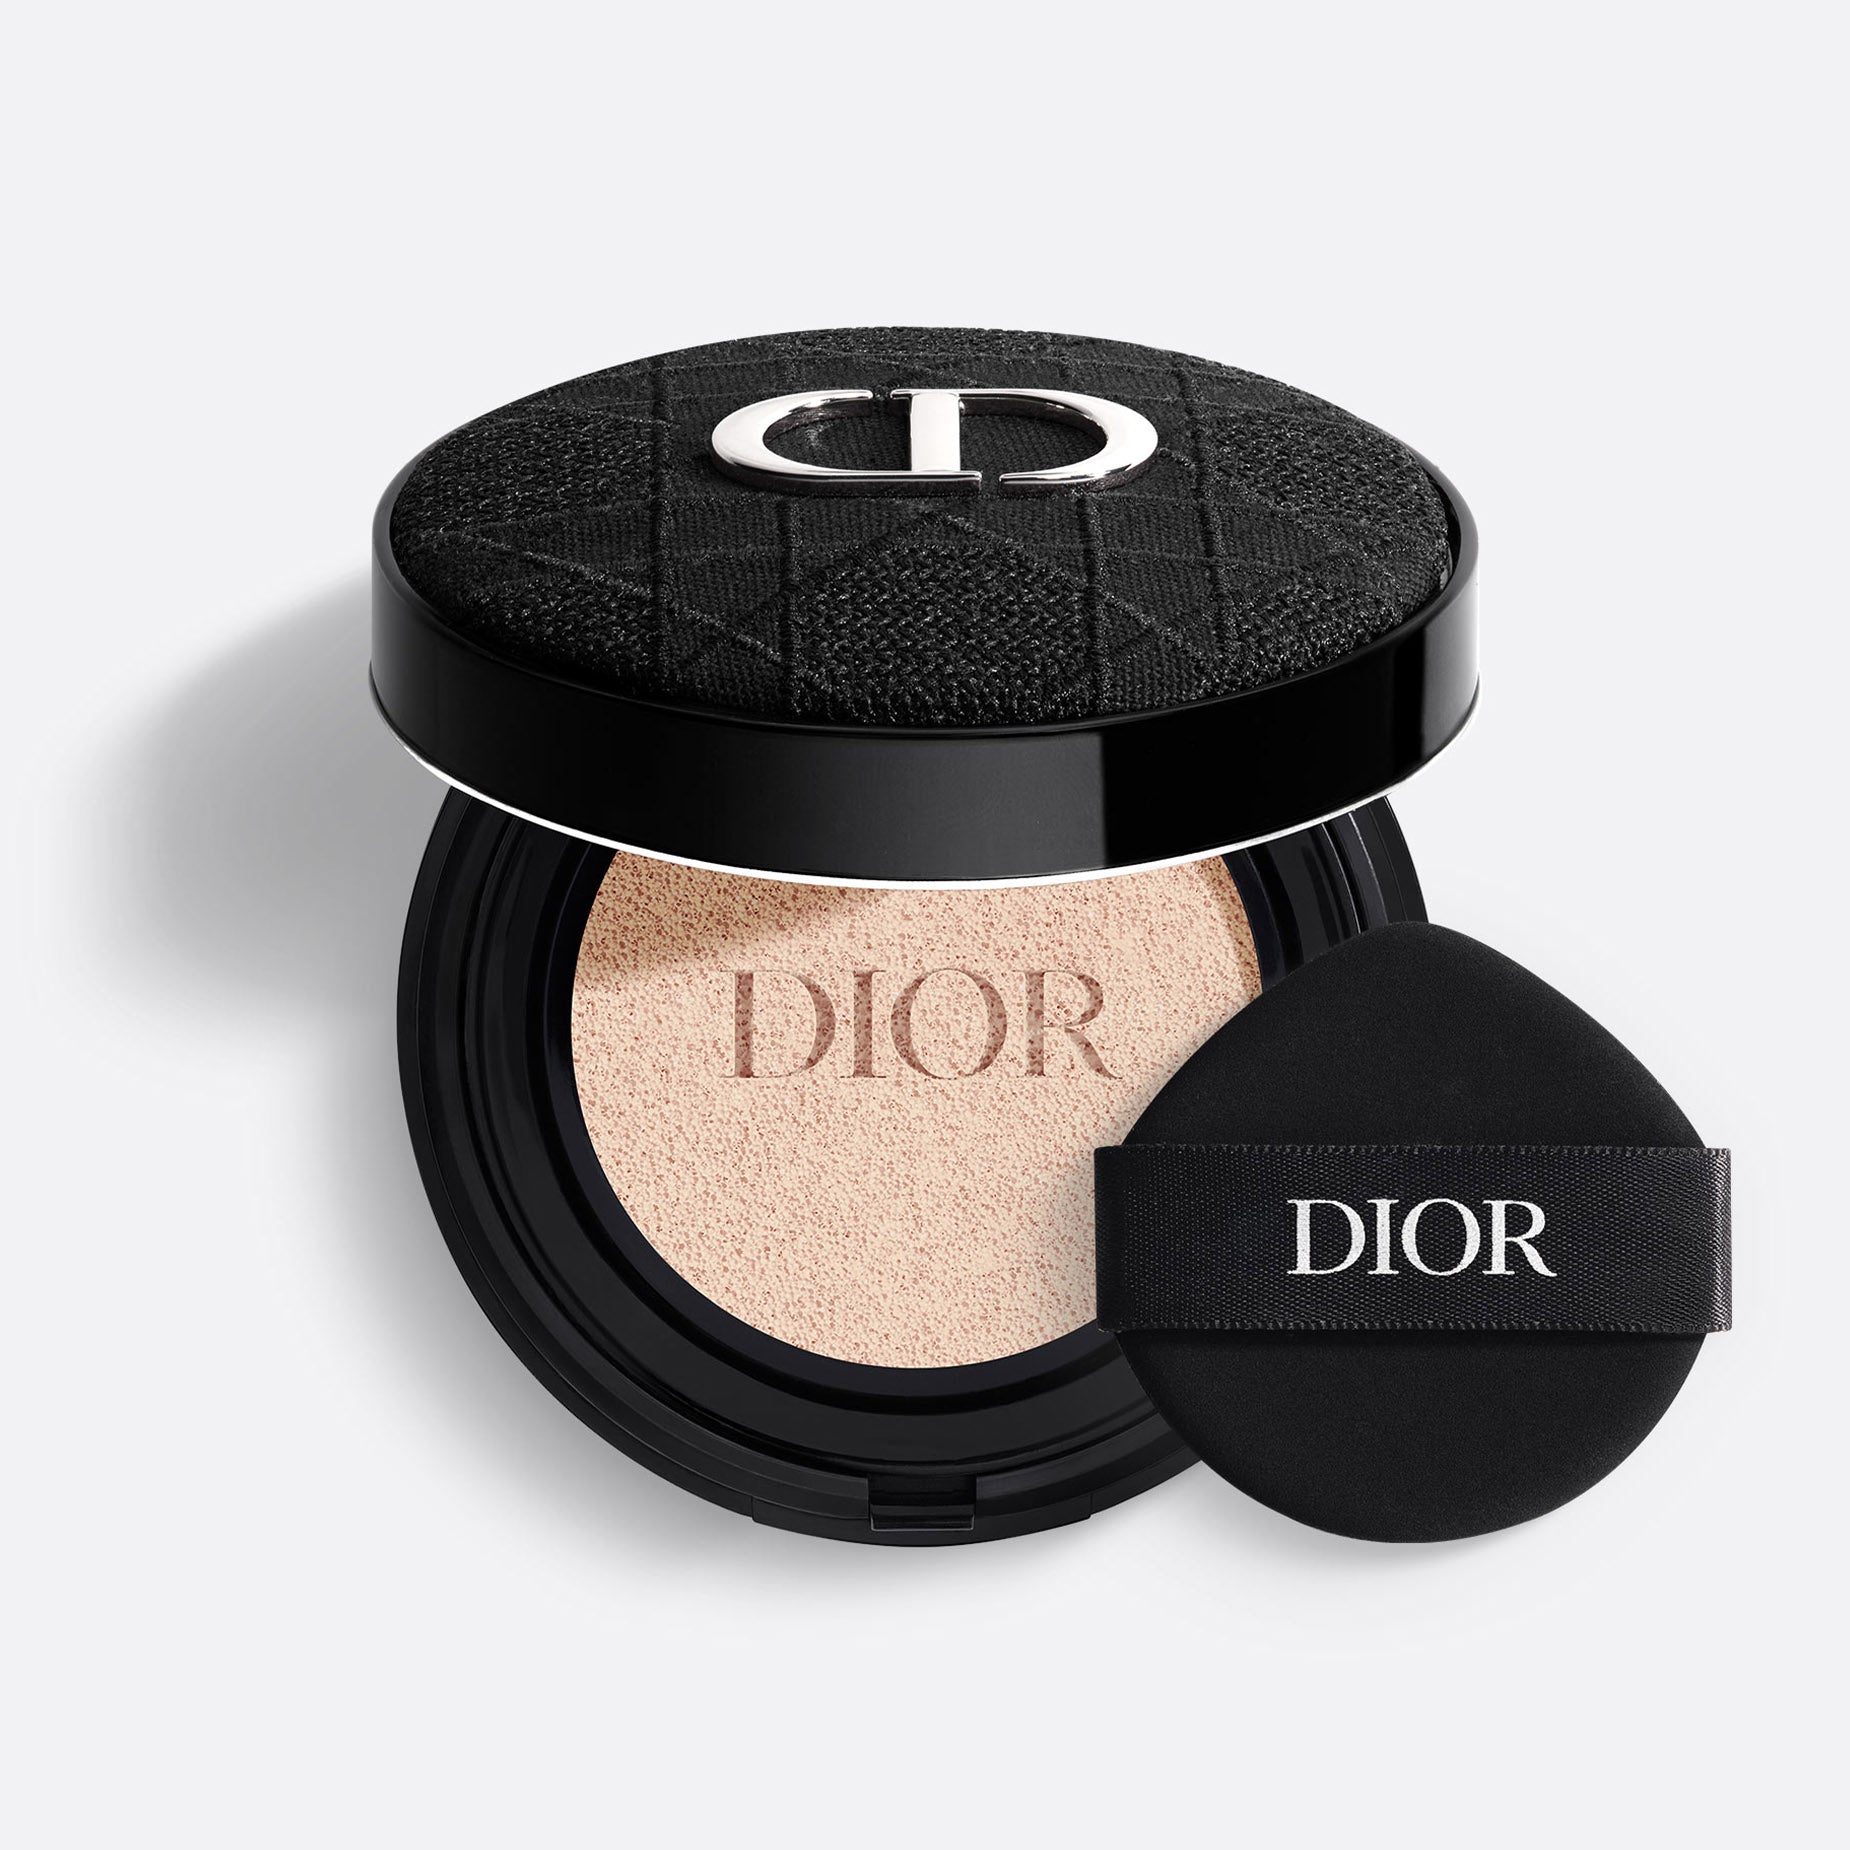 Dior Forever Cushion ~ Cushion Foundation - No-Transfer Matte or Hydrating Glow - 24h Wear and High Perfection